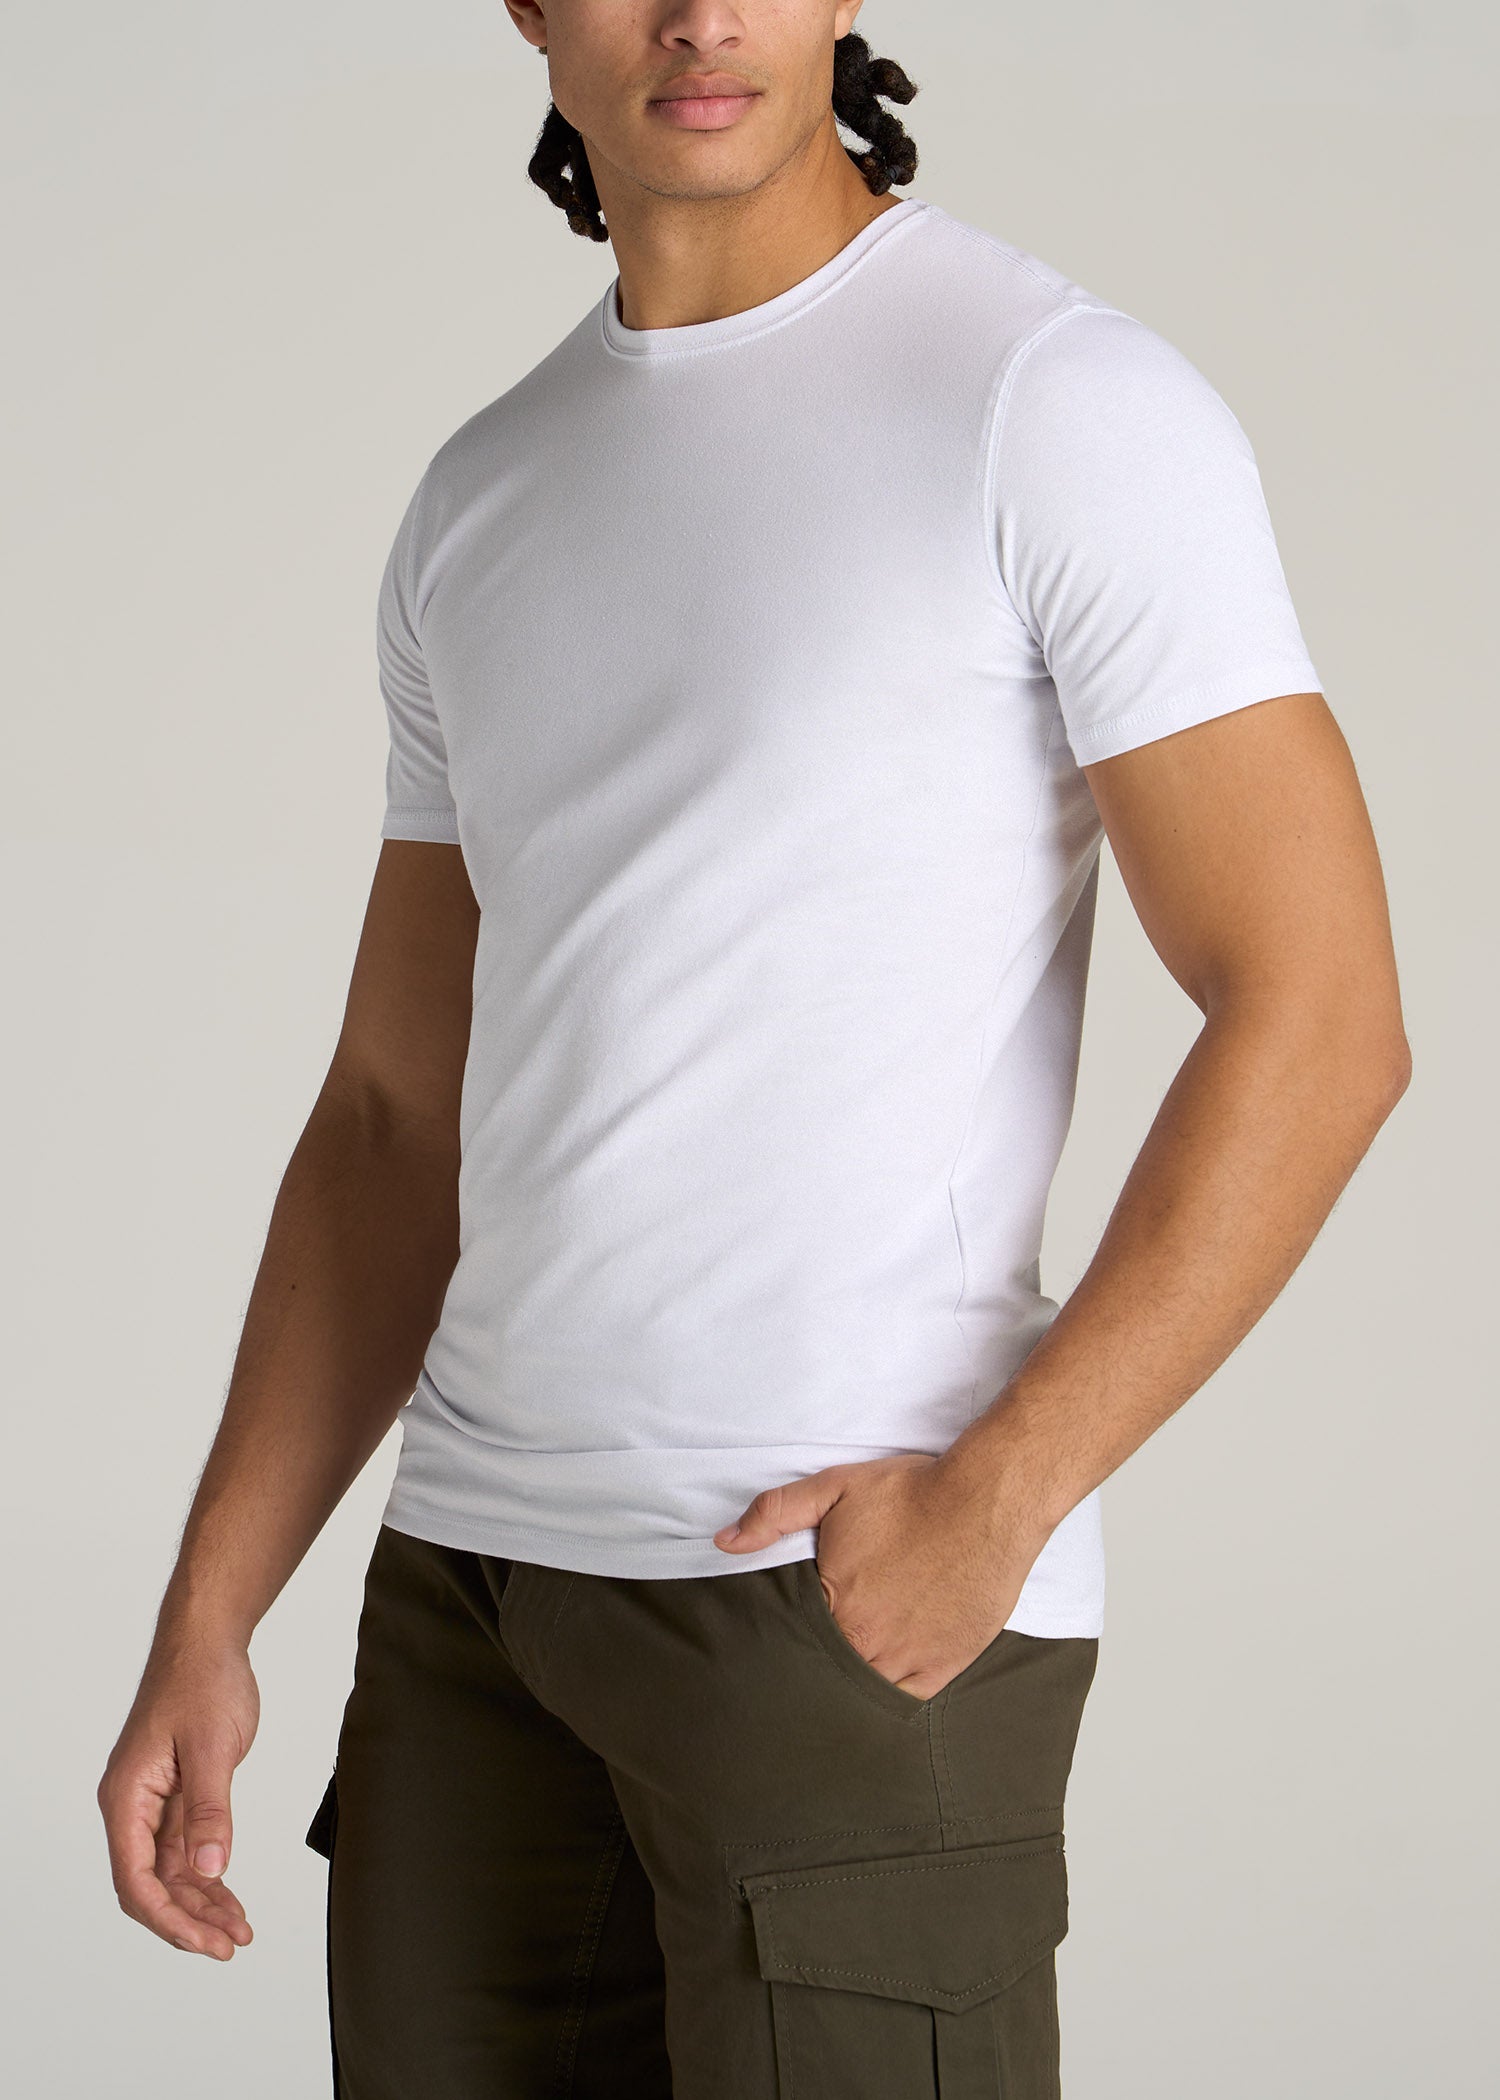 The Essential SLIM-FIT Crewneck Men's Tall Tees in White